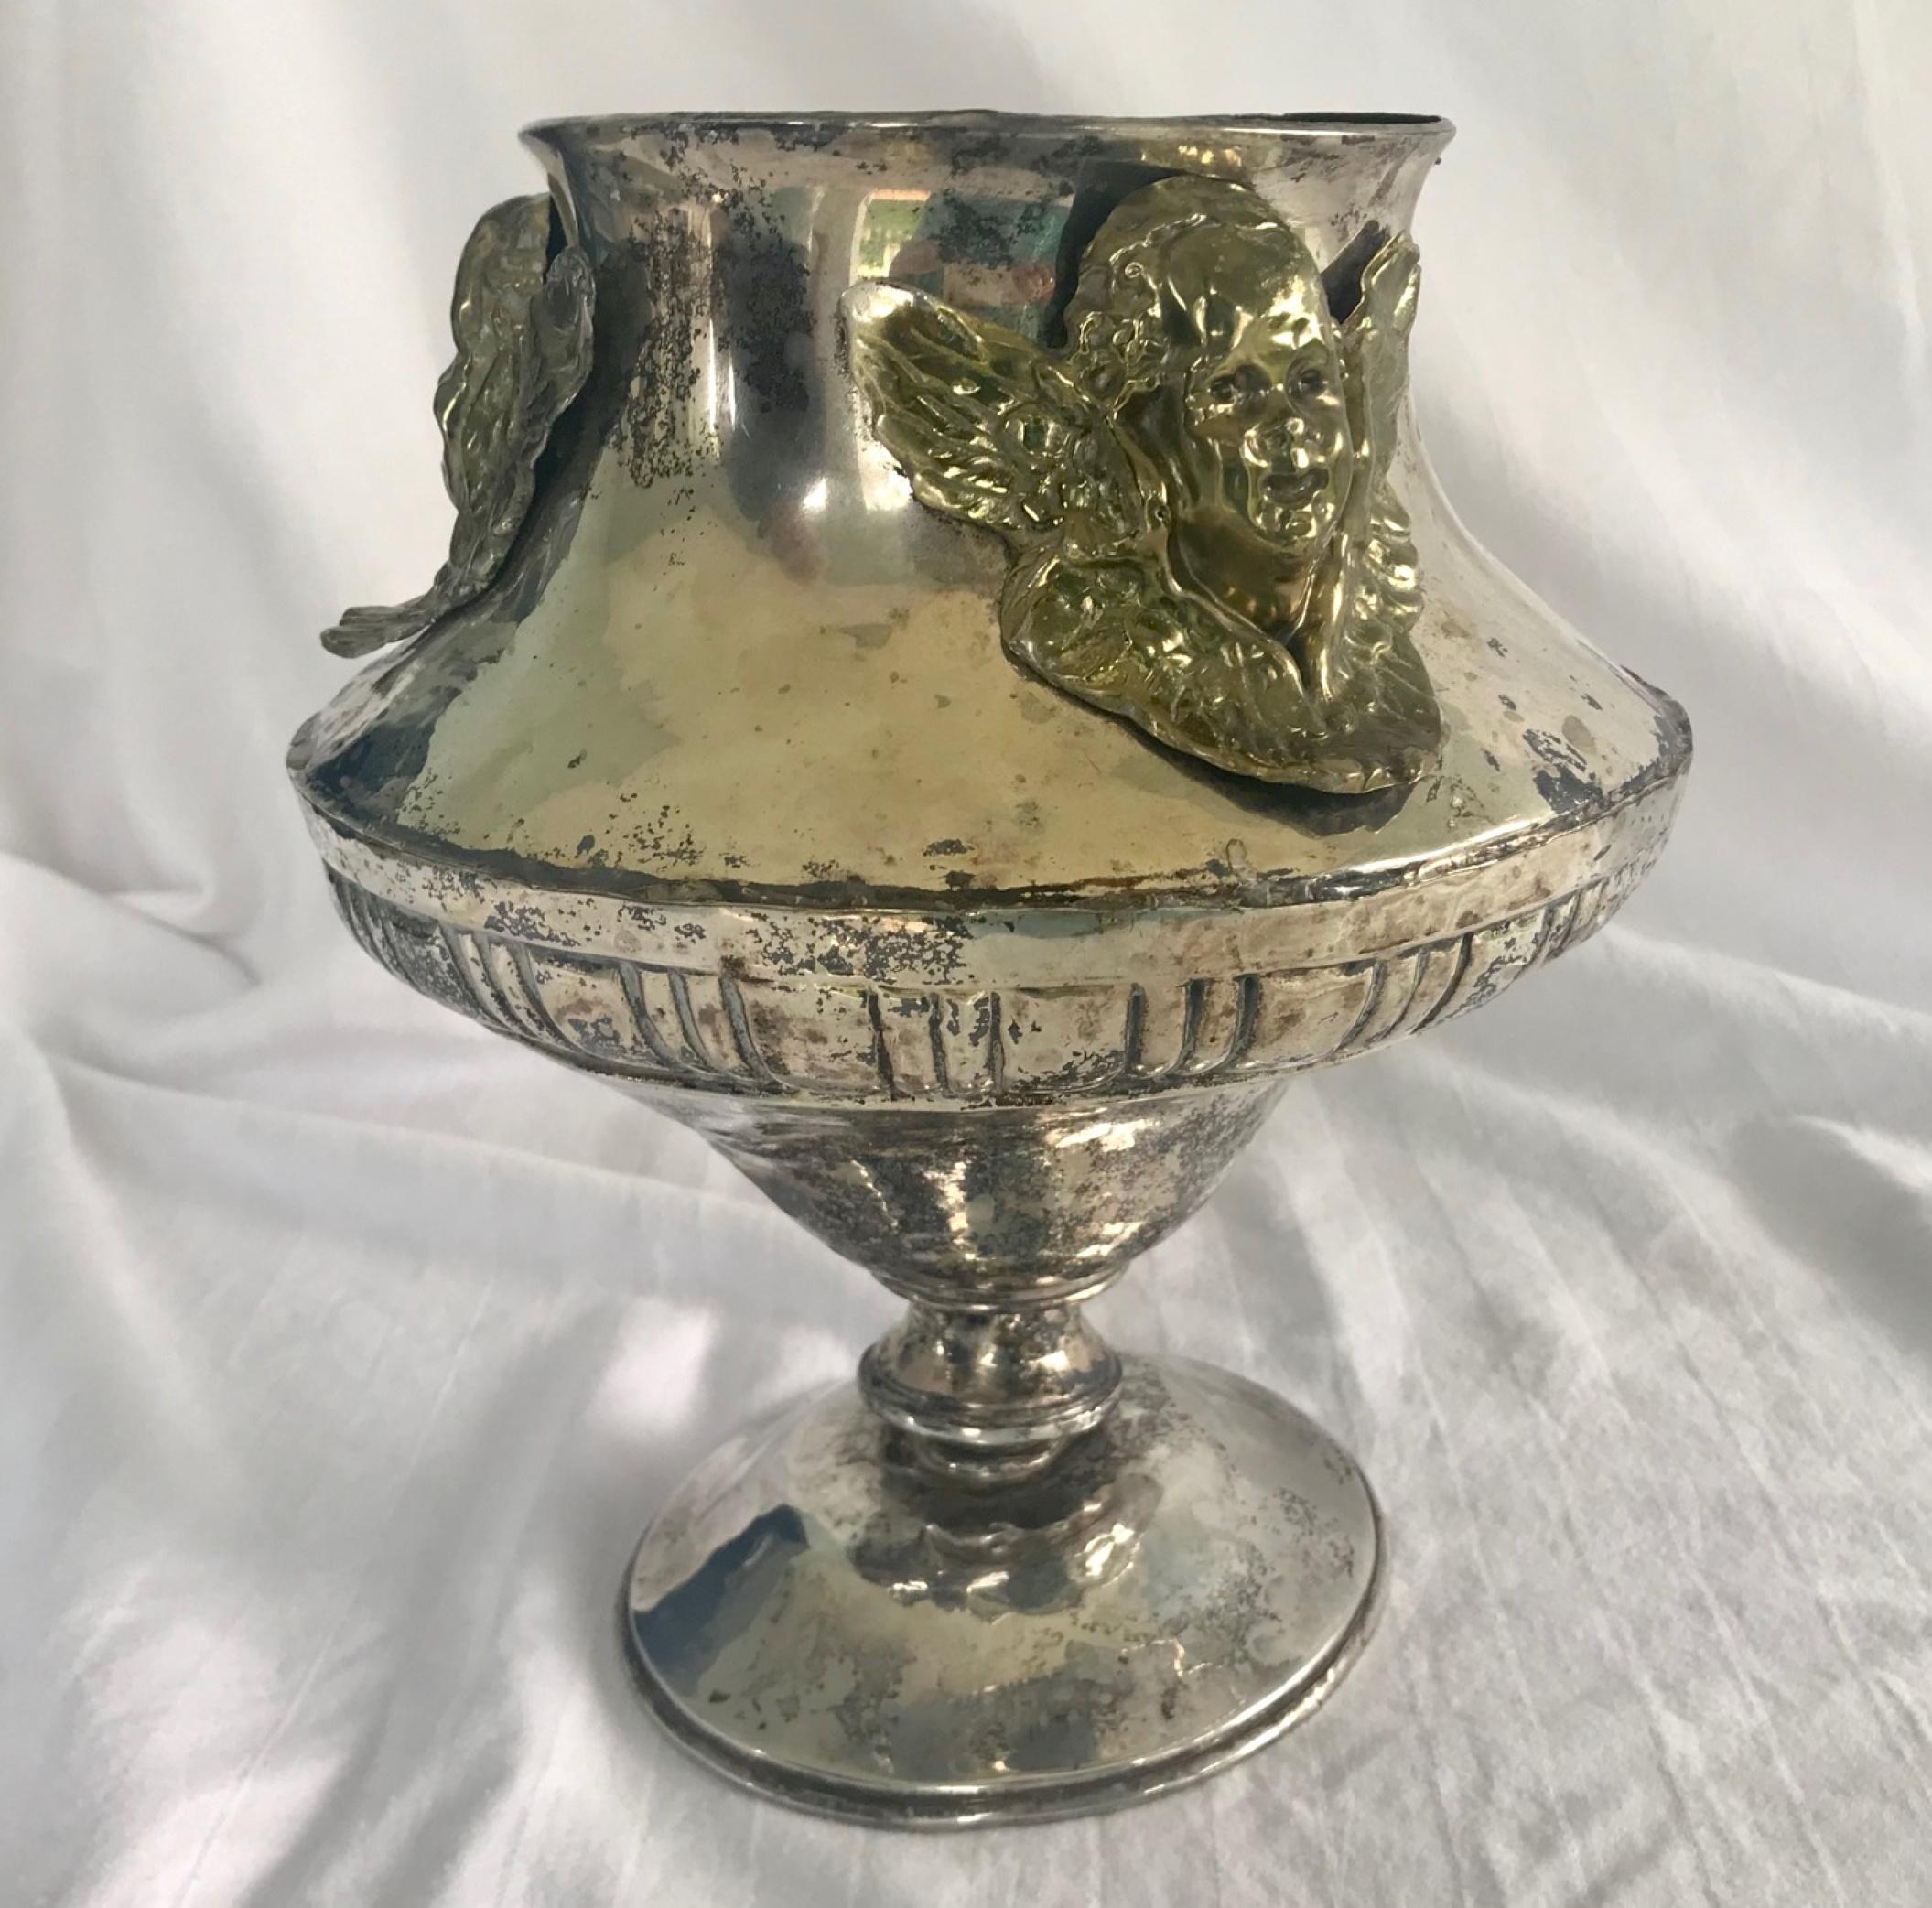 Antique baroque church liturgical vessel, open Ciborium, sanctuary lamp, Aspersoria.

Late 18th century Italian Baroque open Ciborium, Sanctuary lamp or Aspersoria is made in silver plated brass and is decorated with three ormolu winged angel